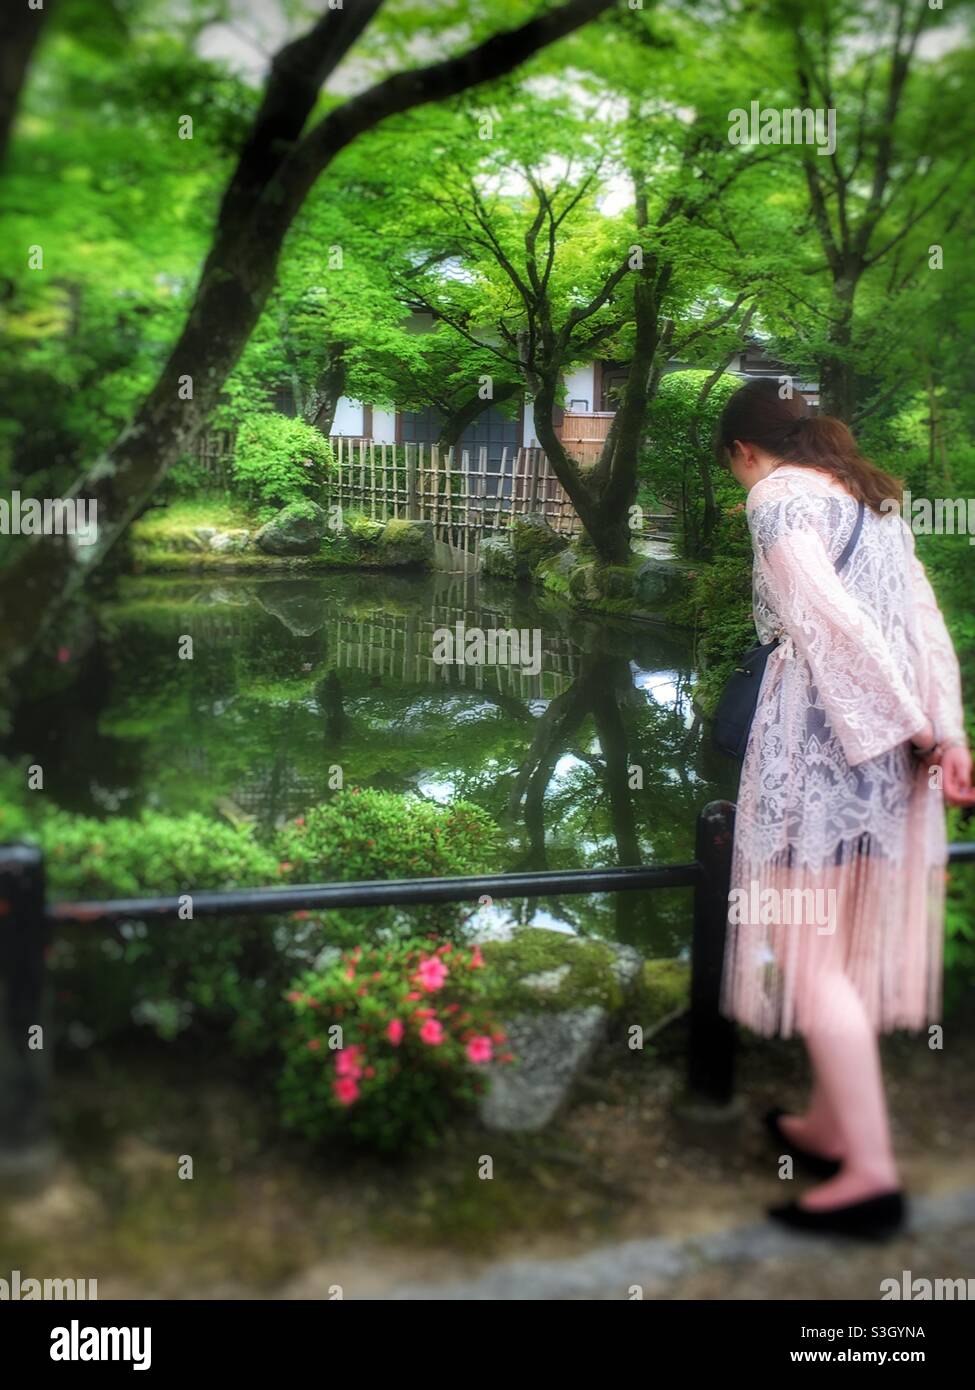 Girl looking in lake in gardens of Kiyomizu-dera Temple, Kyoto, Japan, with bridge, trees and small white building in background. Stock Photo